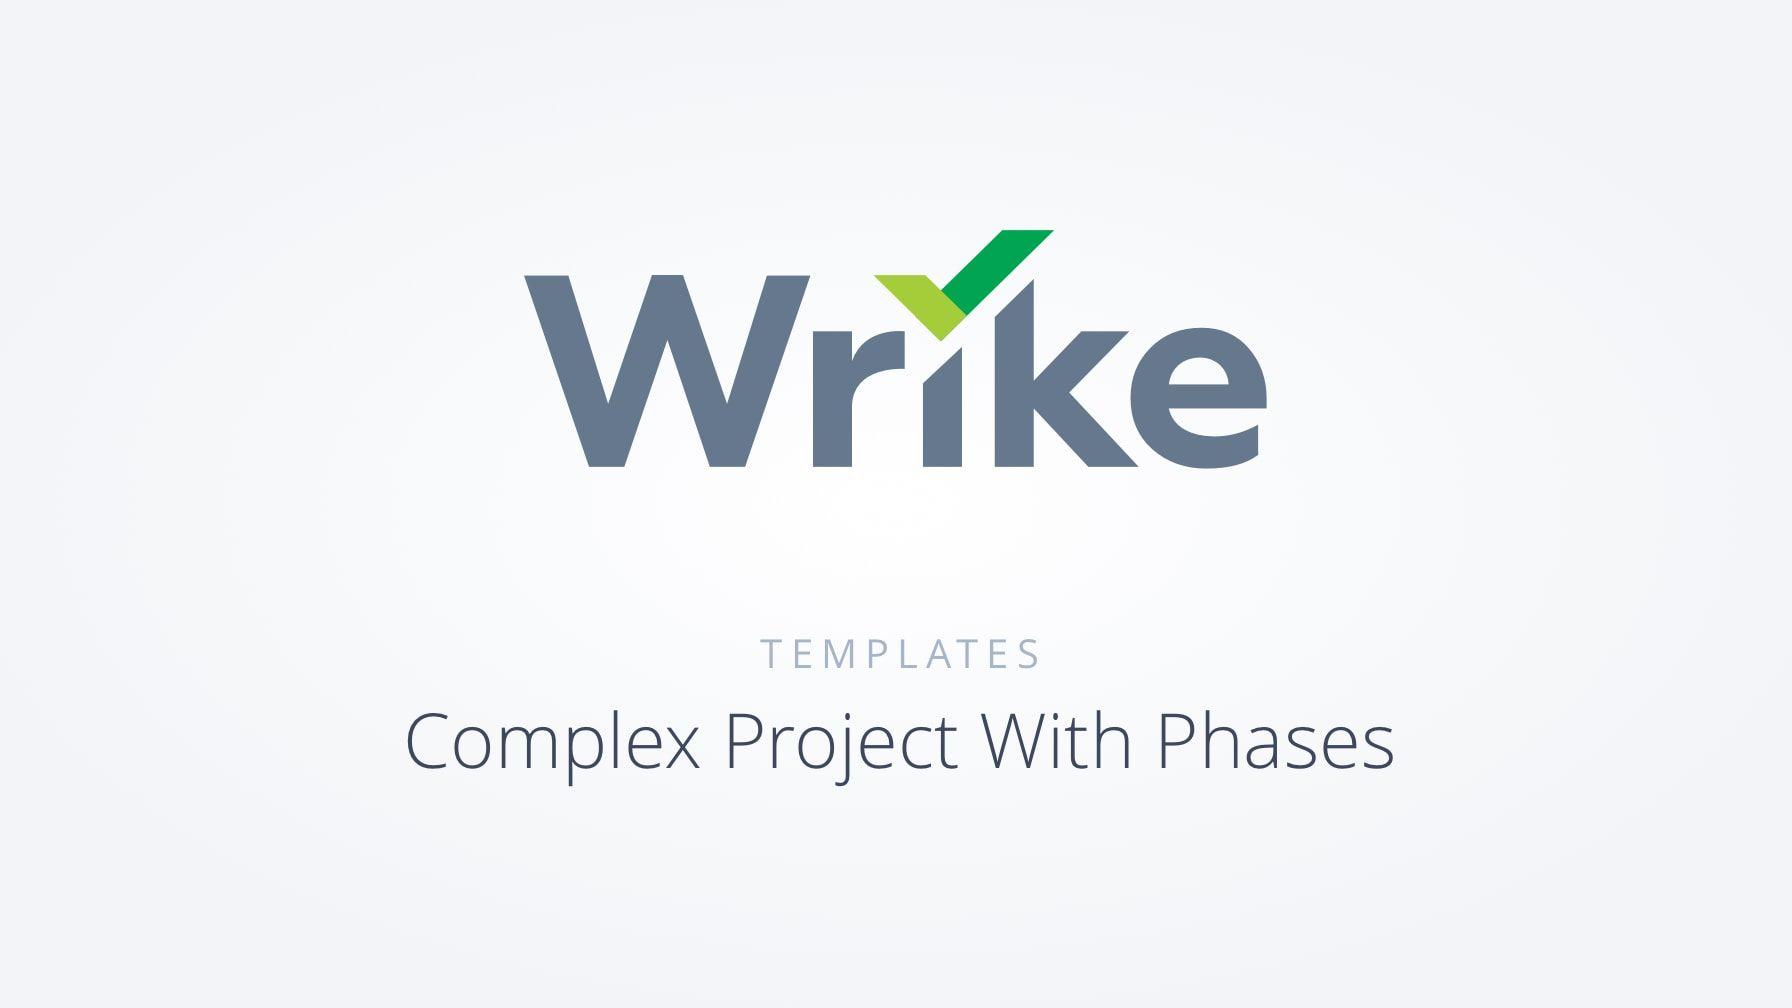 Wrike Logo - Complex Project with Phases | Wrike Templates for Project Management